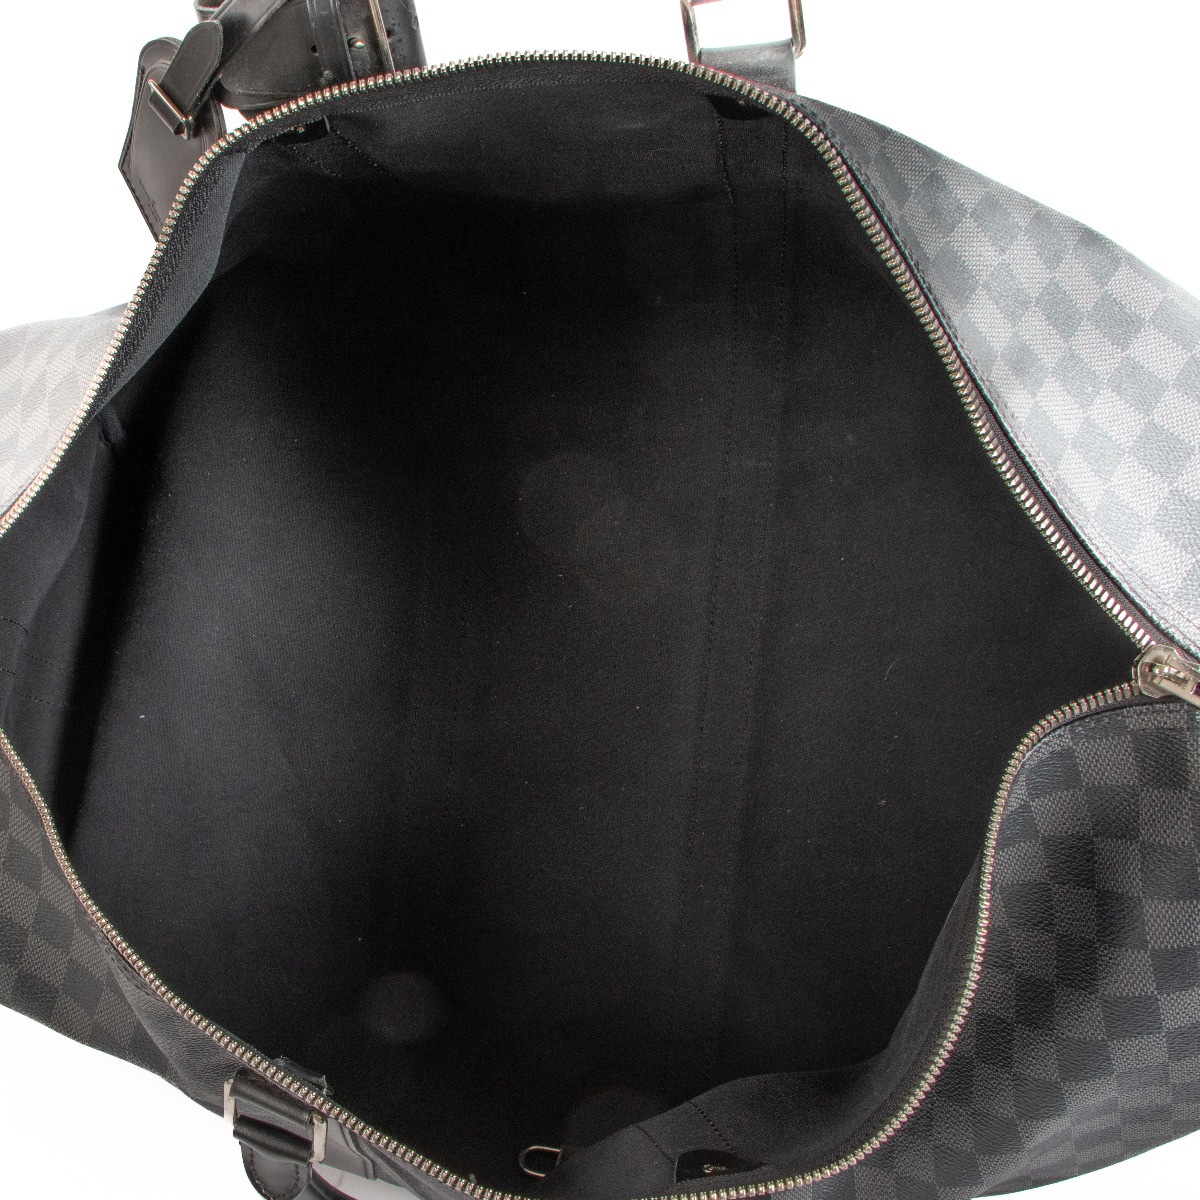 NEW Louis Vuitton Keepall 55 damier graphite strap customized BATBAG II!  For Sale at 1stDibs